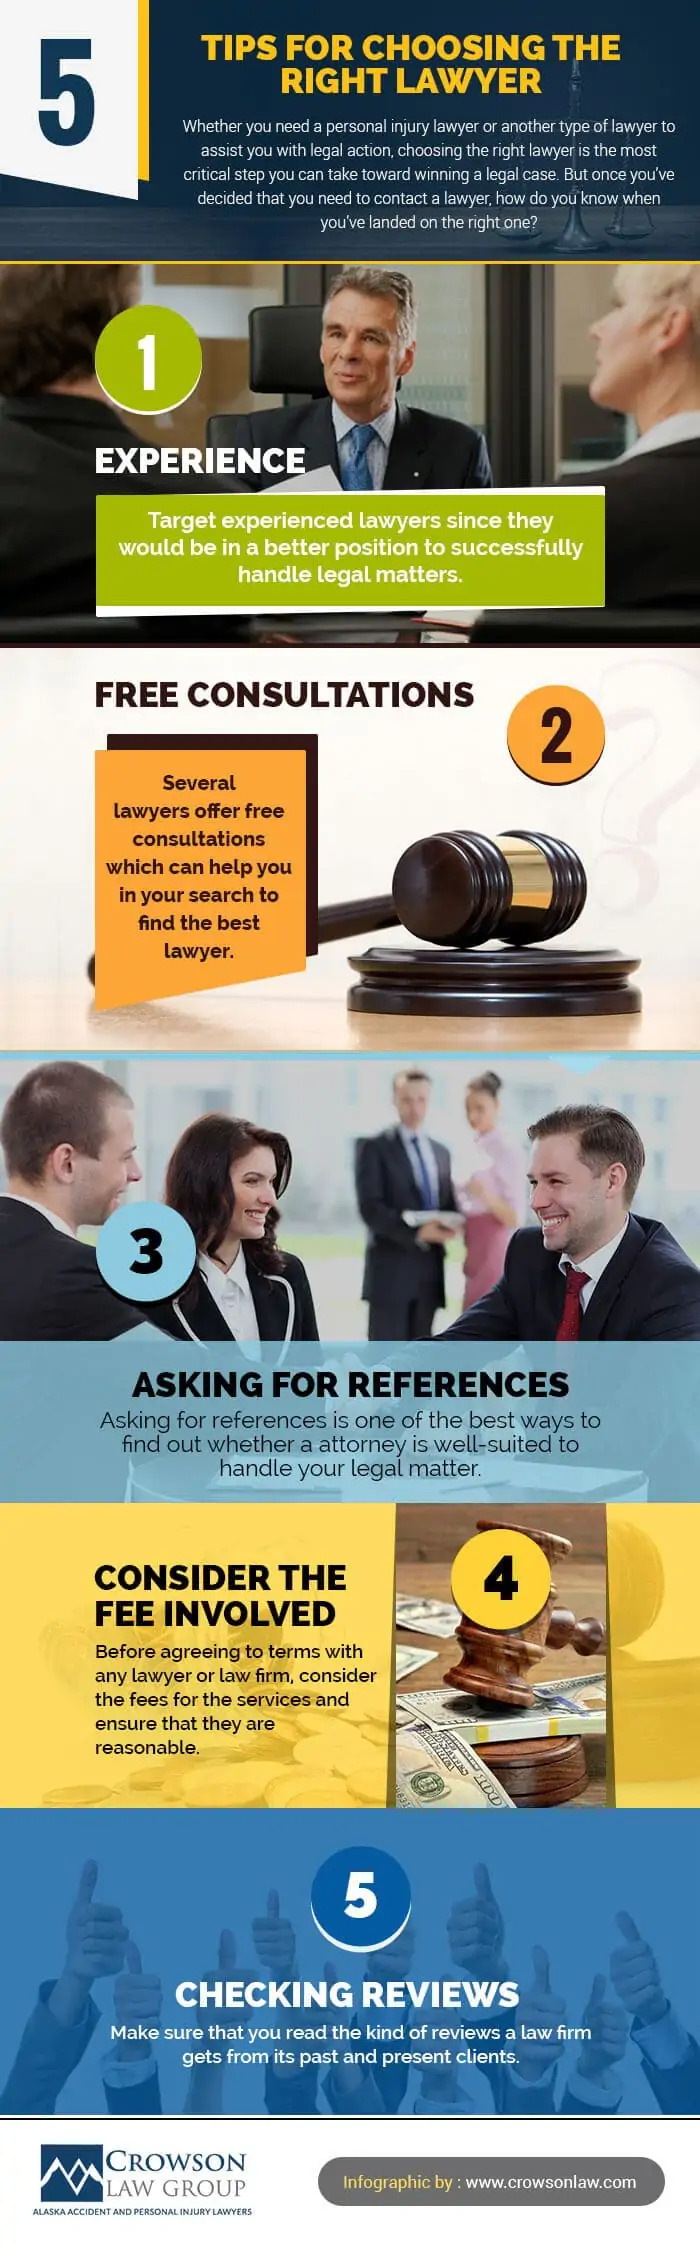 Choosing-the-Right-Lawyer